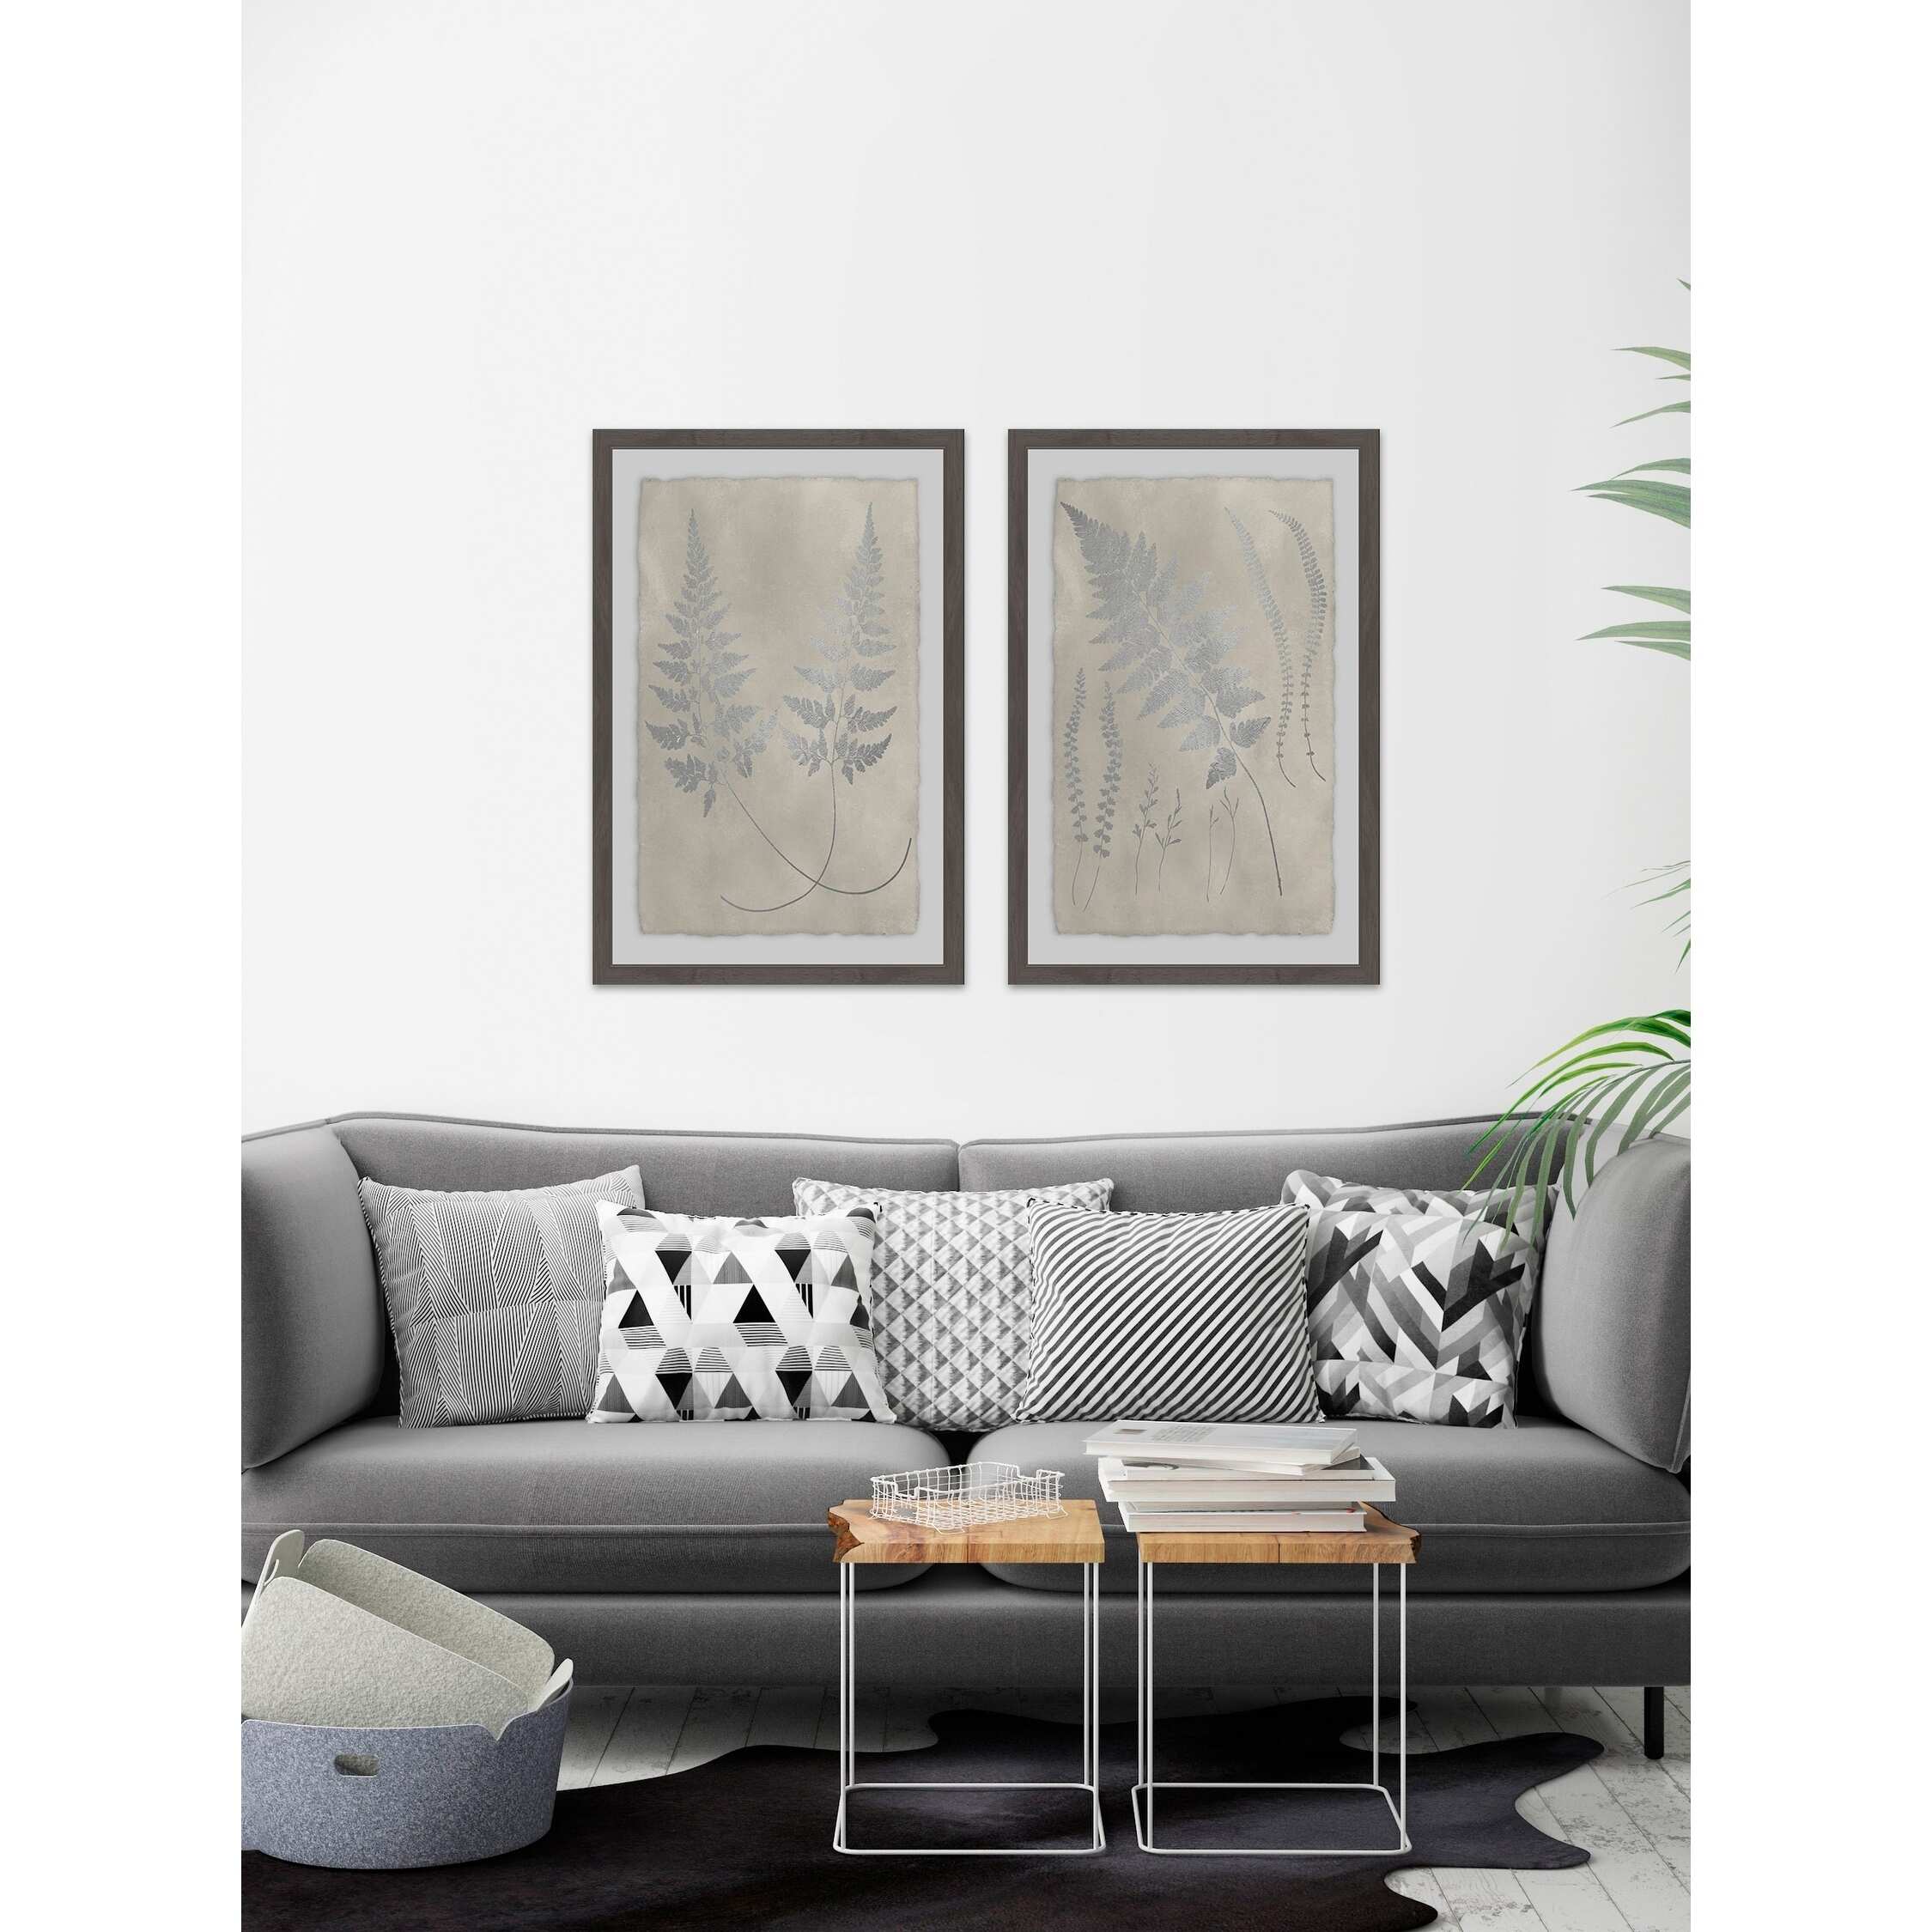 Marmont Hill - Handmade Vintage Fern Study IV Diptych - Multi-color